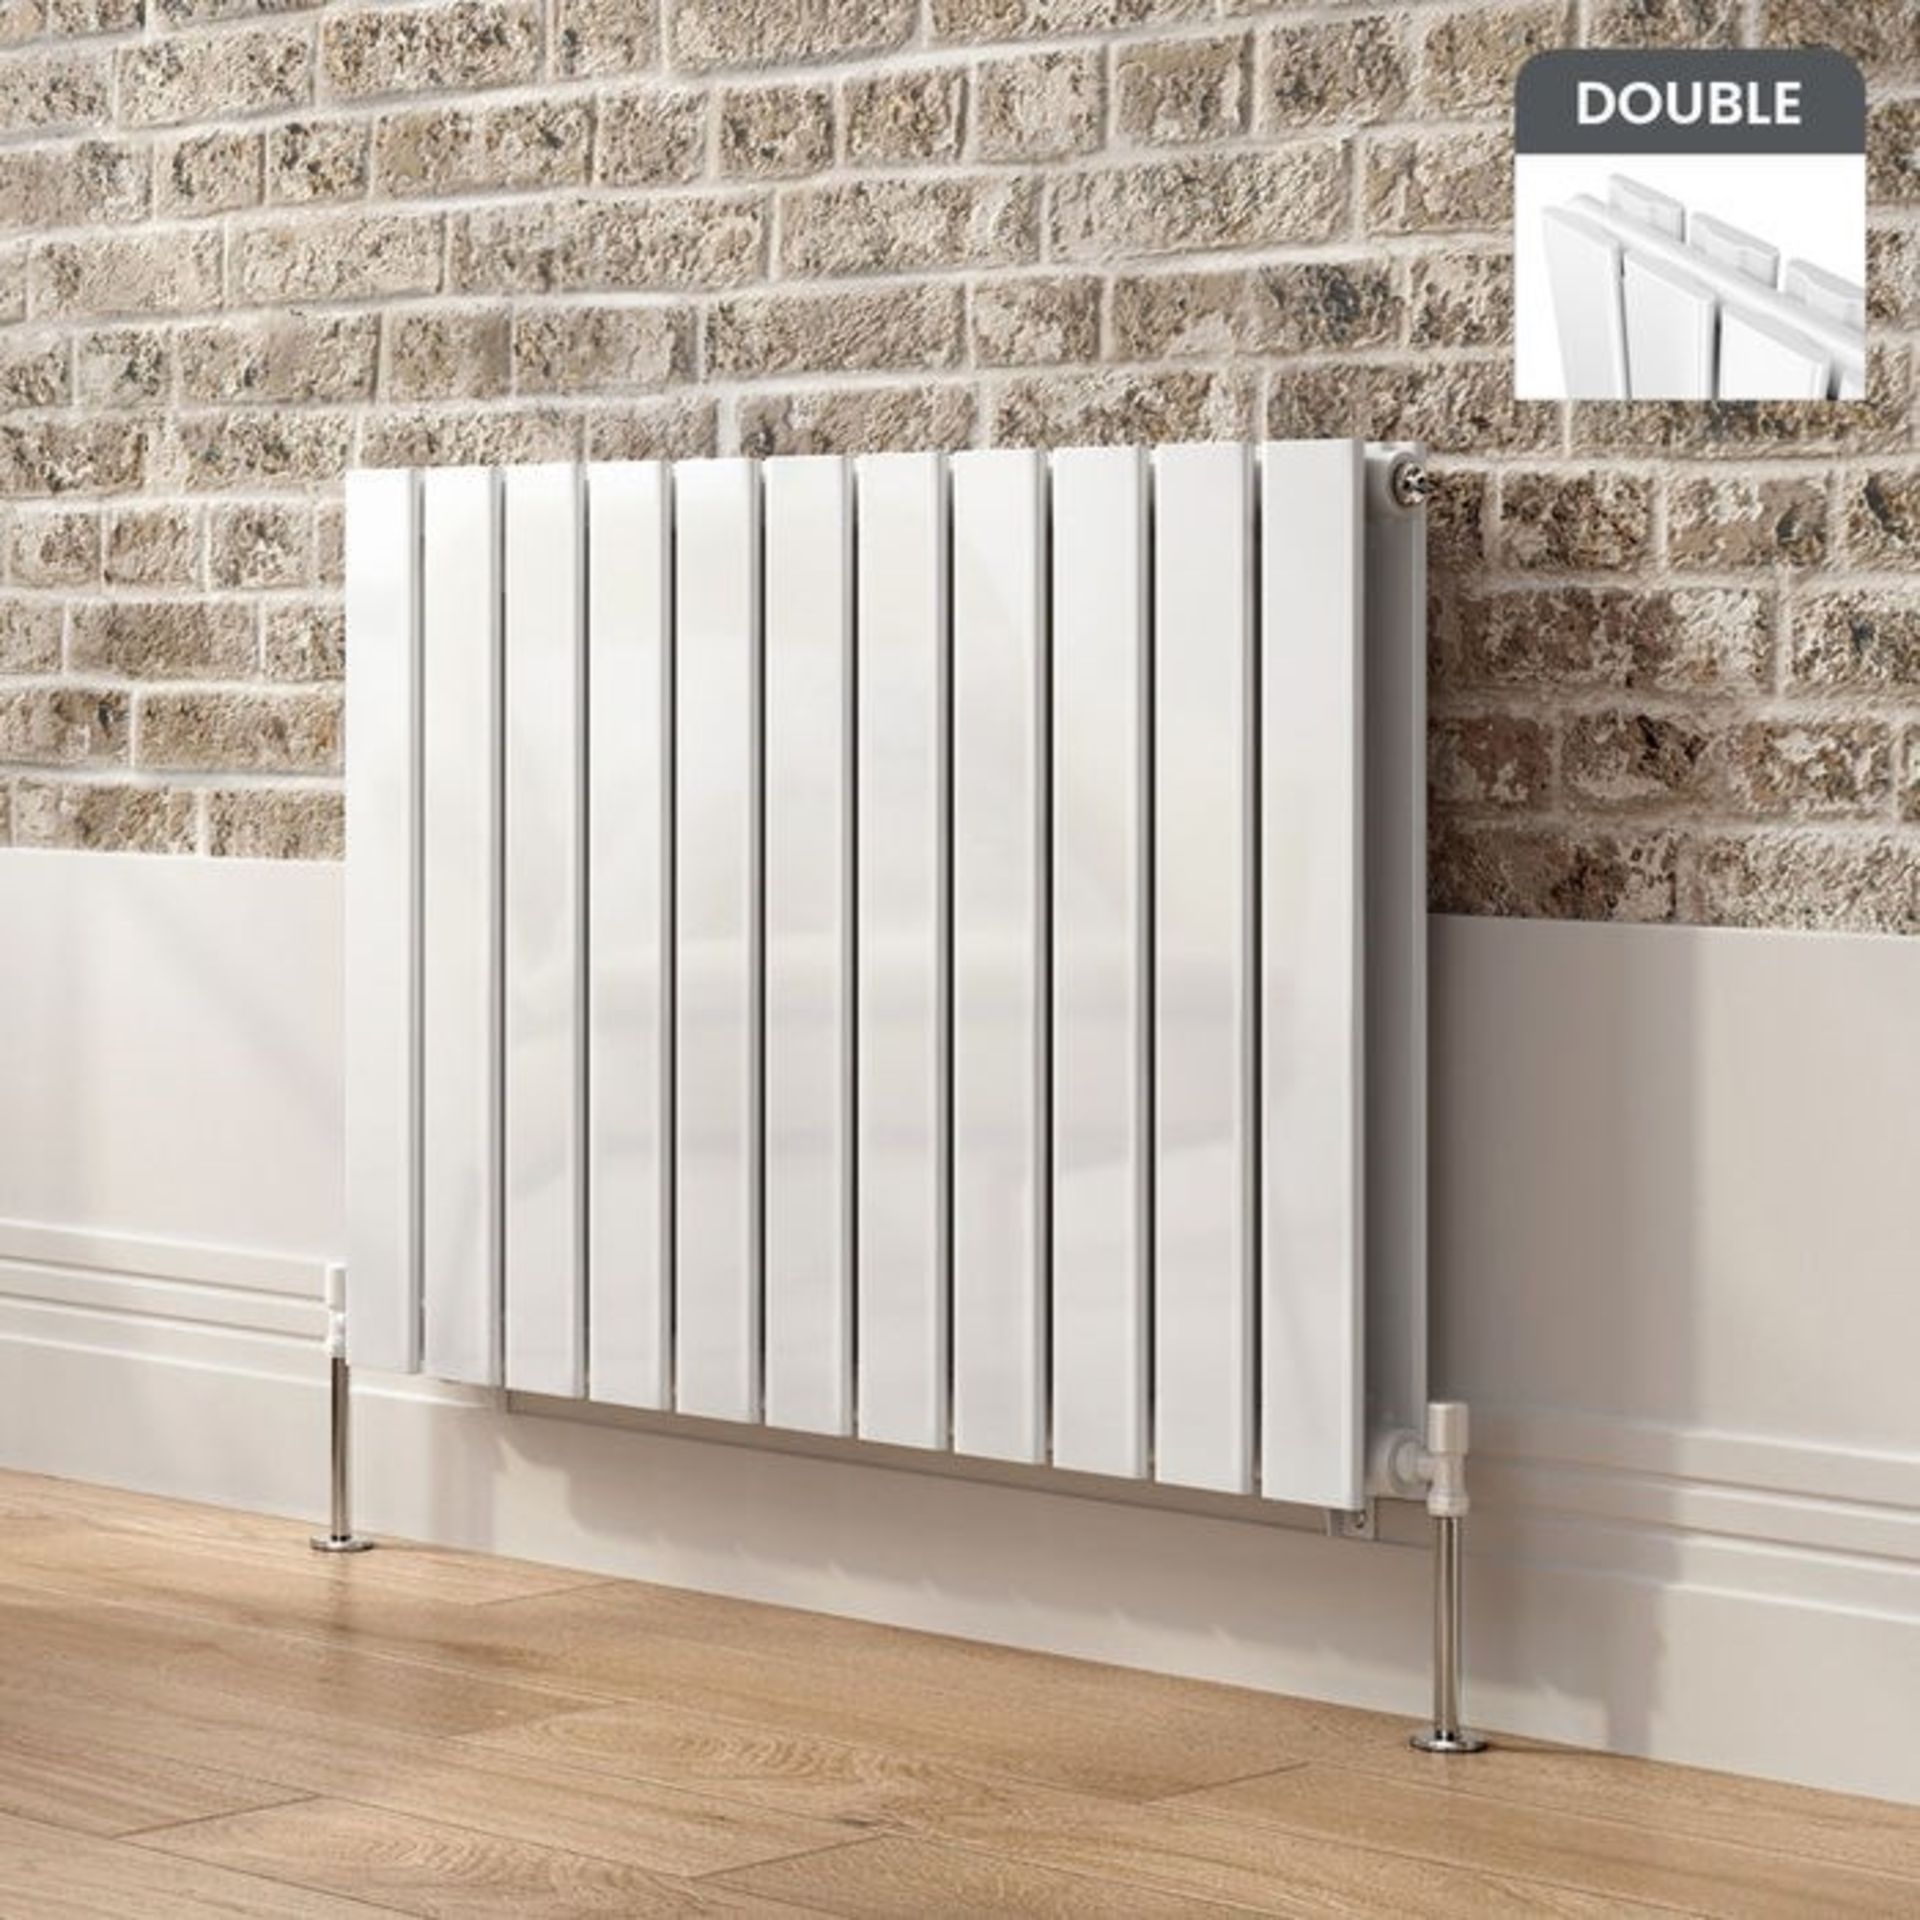 600x830mm Gloss White Double Flat Panel Horizontal Radiator. RRP £474.99.RC221.Made with high... - Image 4 of 4